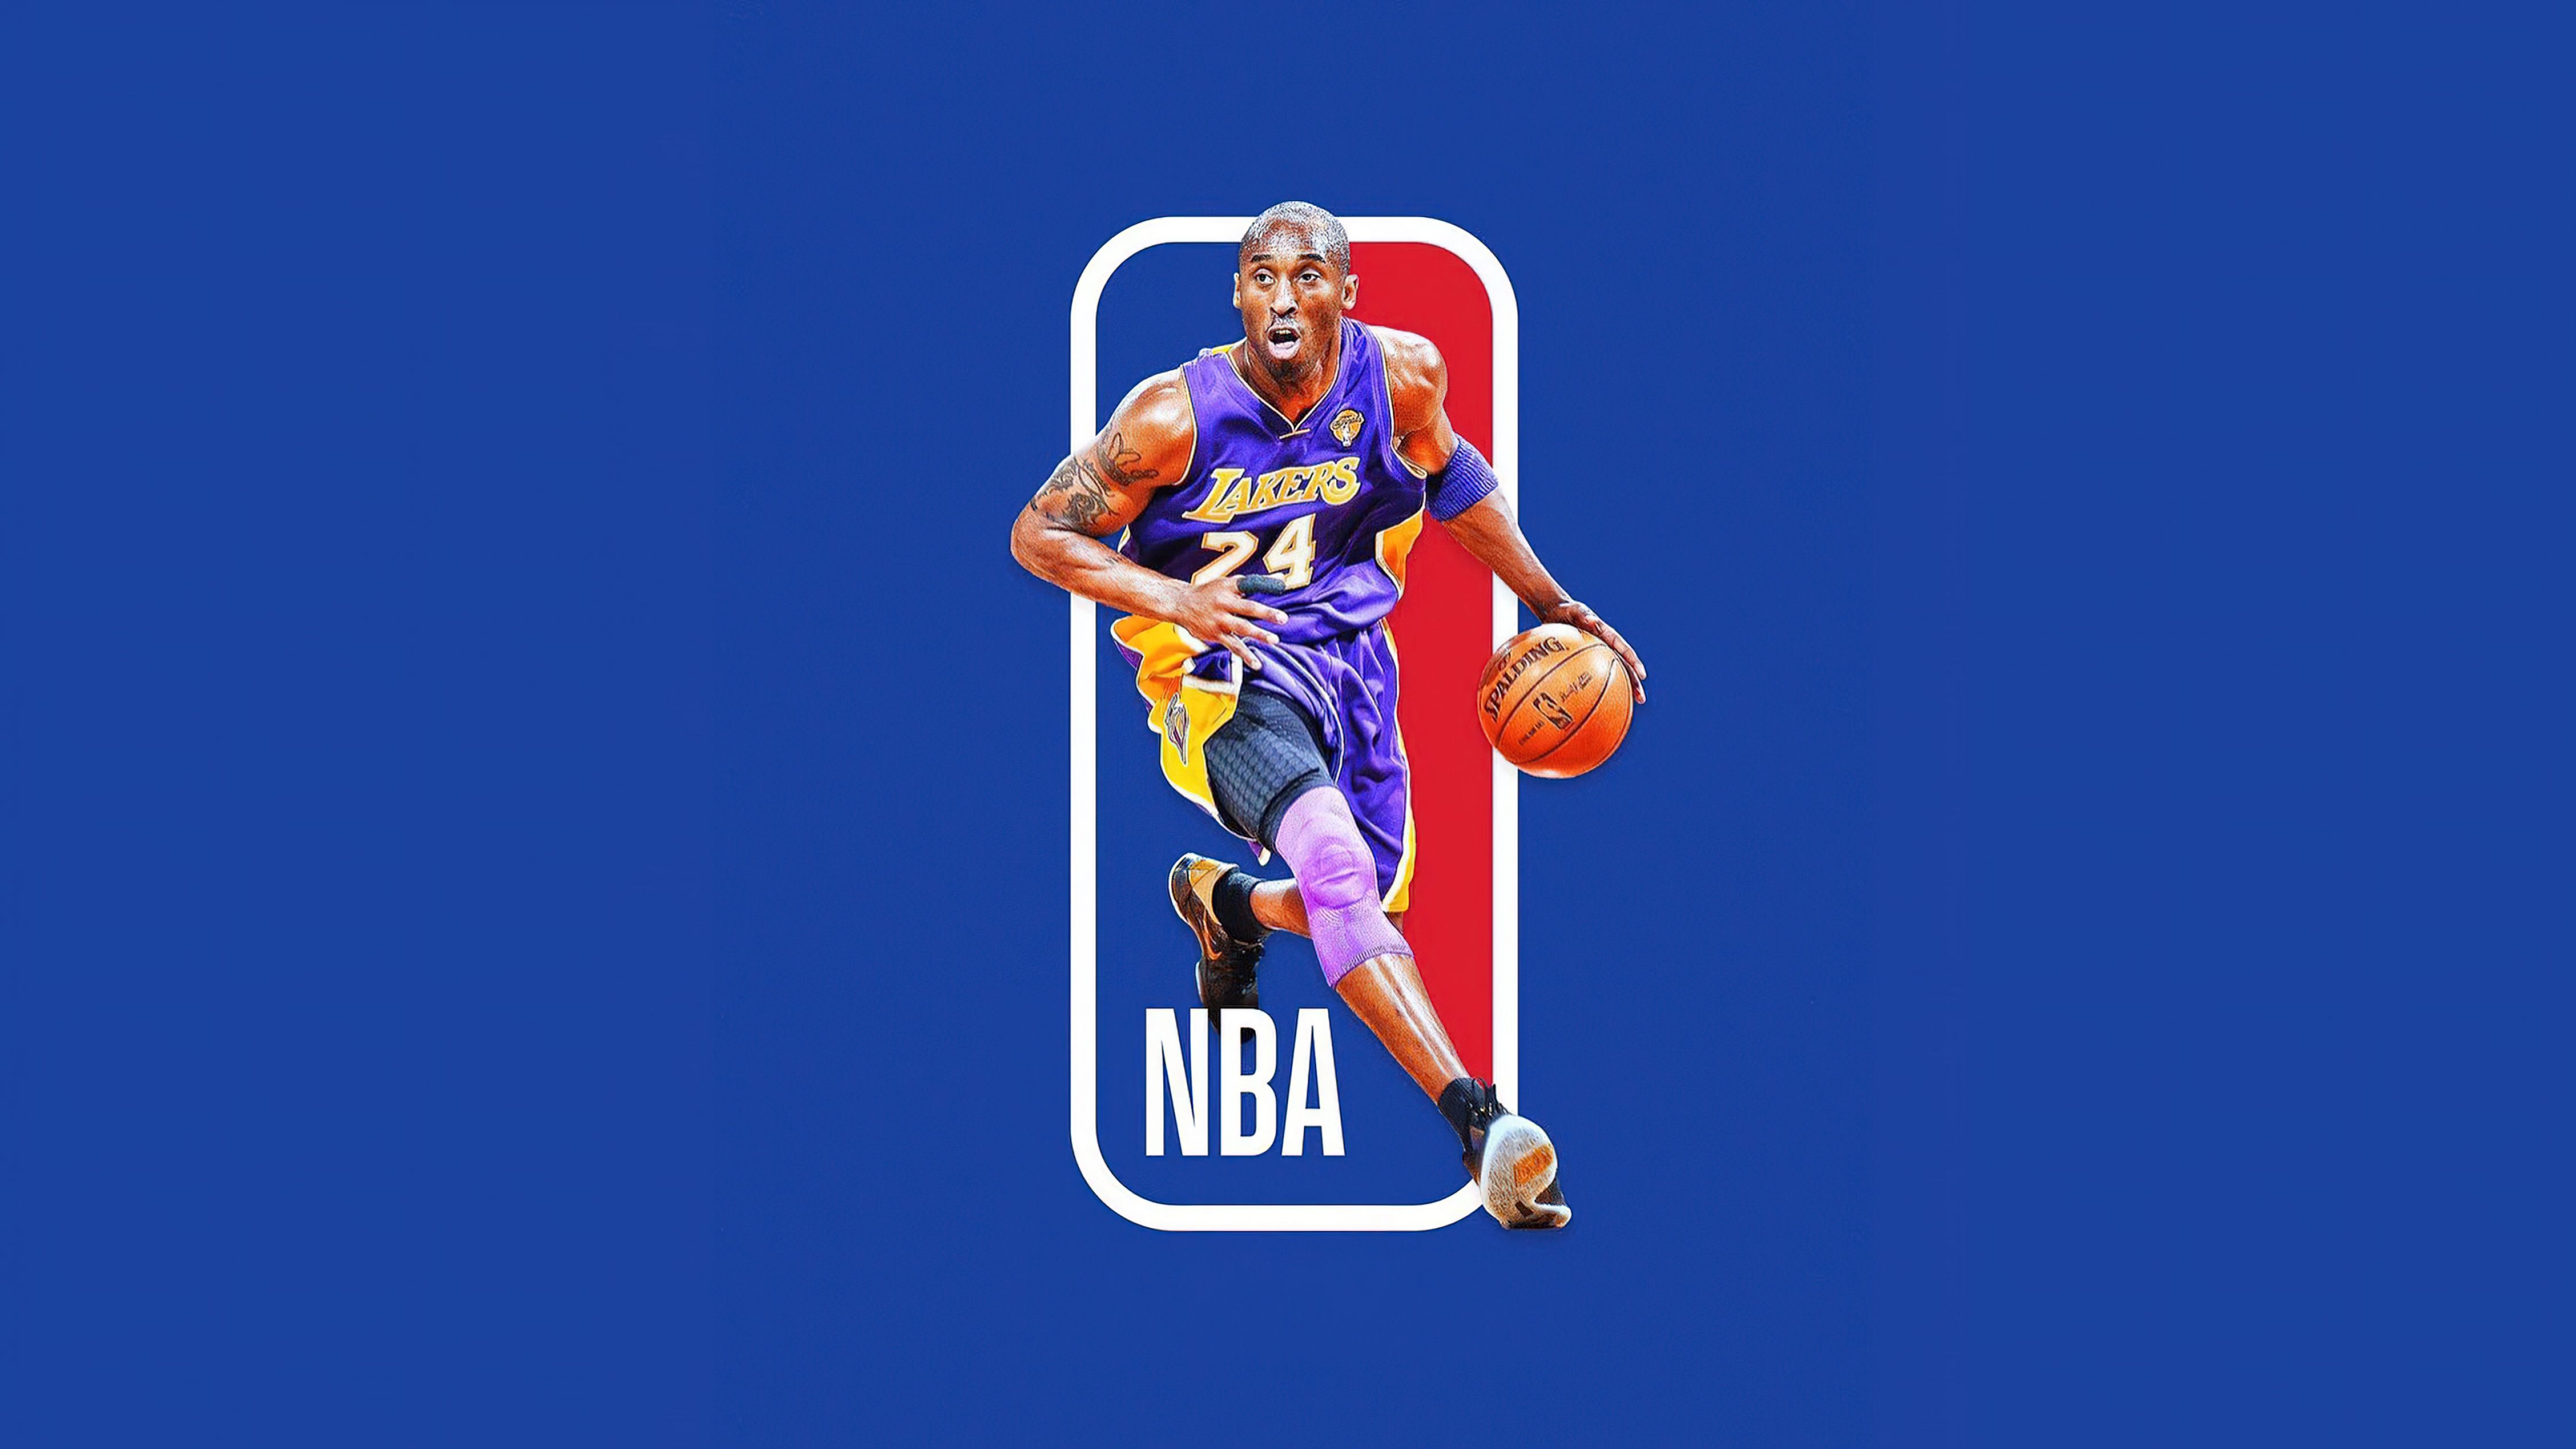 A Kobe Bryant wallpaper featuring the NBA logo and Kobe in his Lakers jersey. - Kobe Bryant